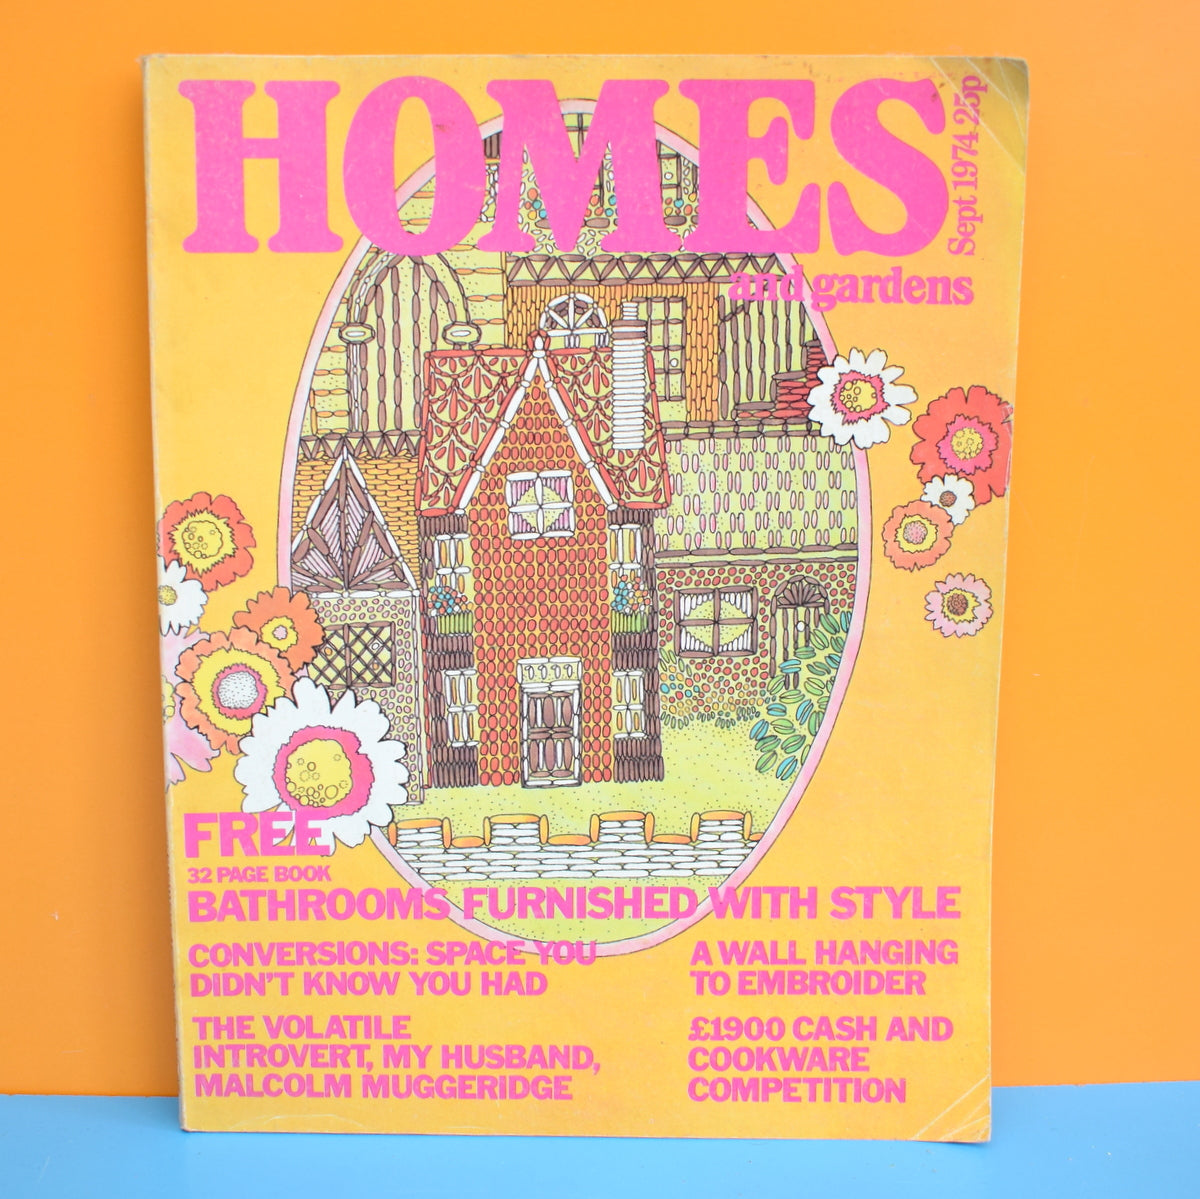 Vintage 1970s Homes And Gardens Magazine  - 1974